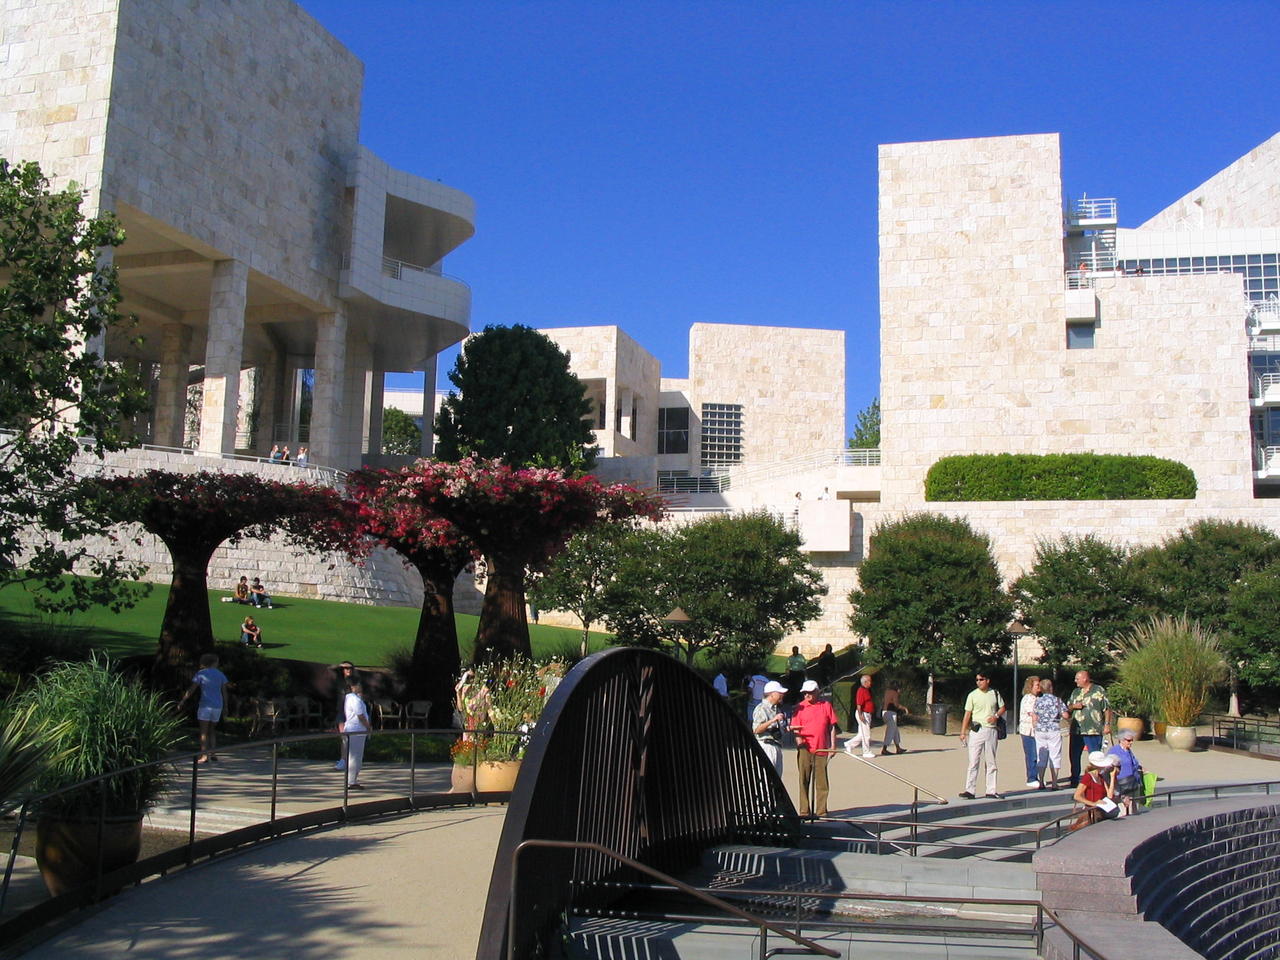 Getty from the Garden